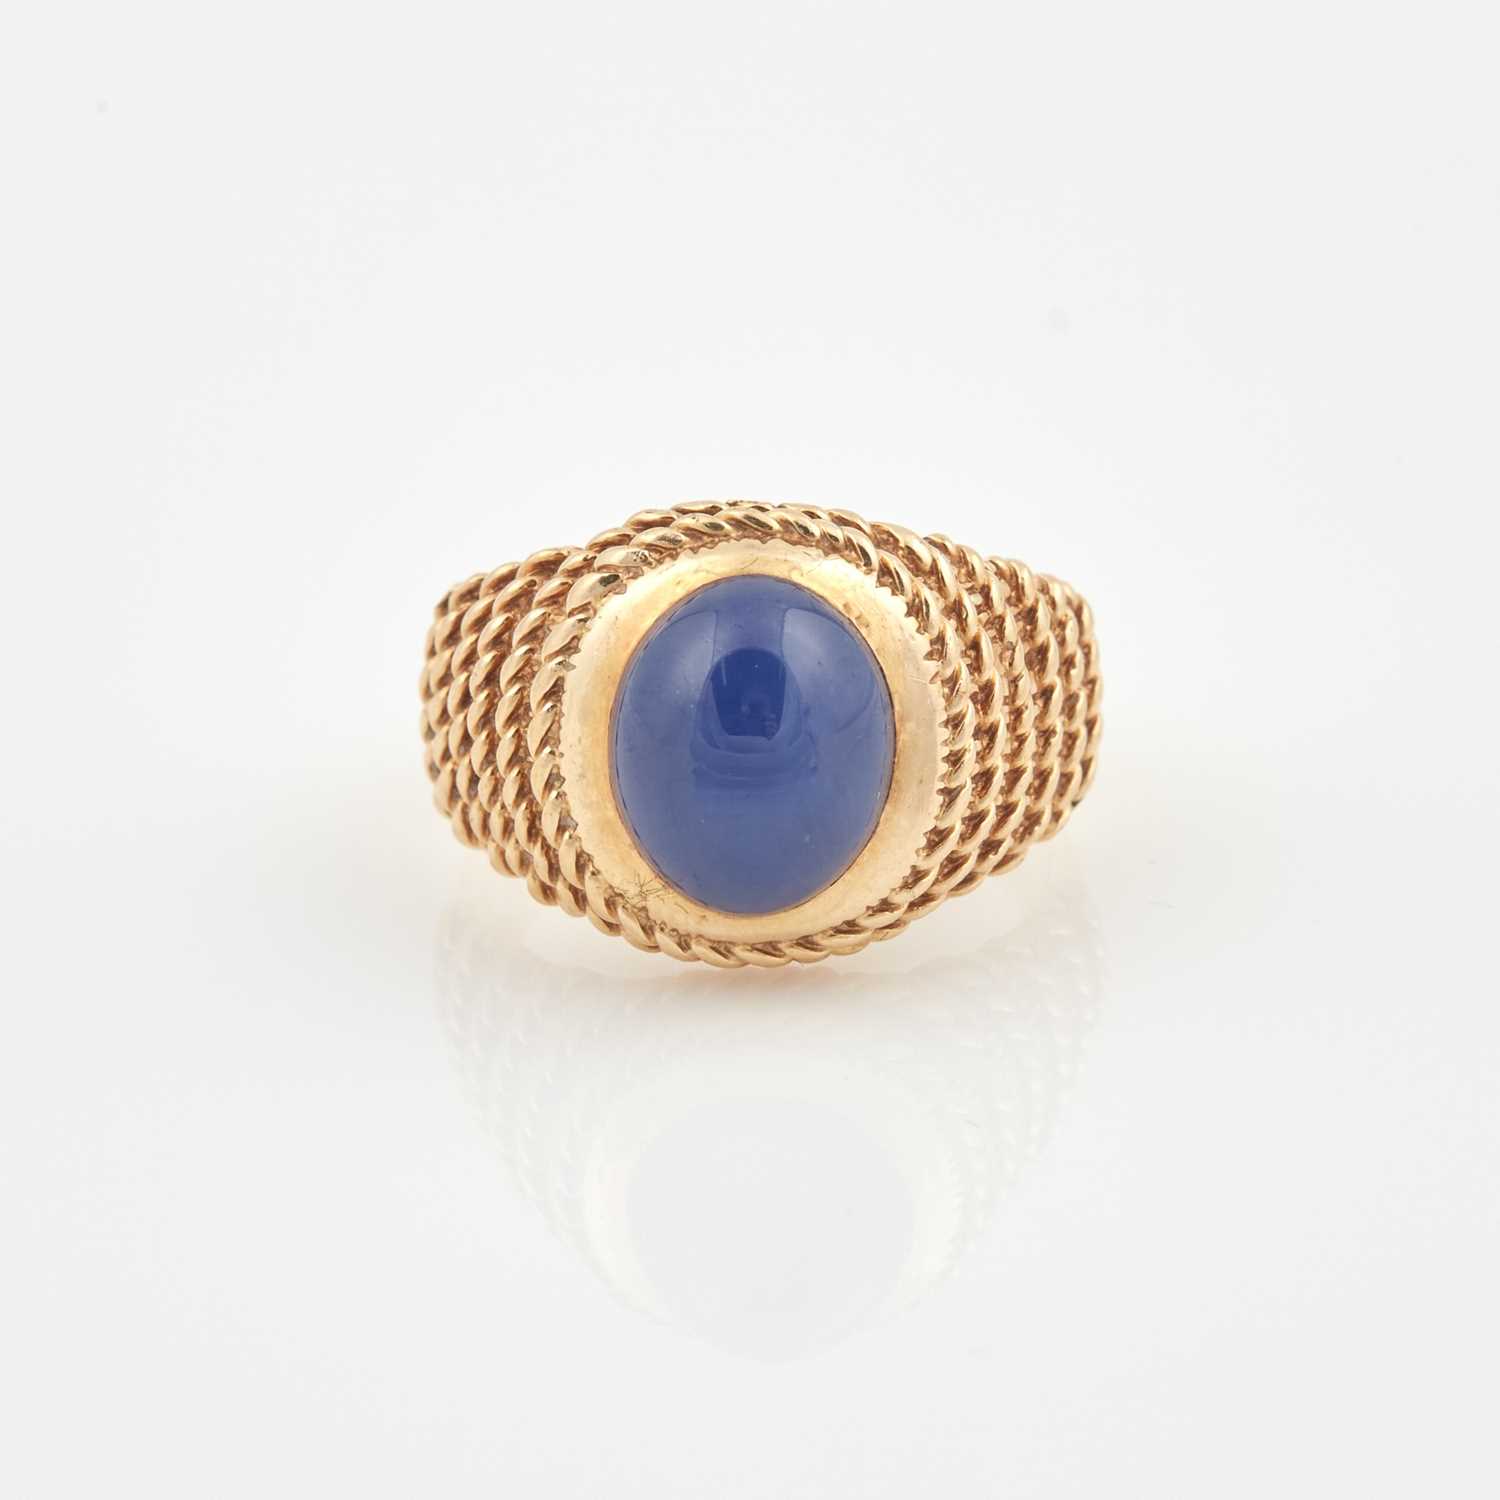 Lot 266 - Gold and Stone Ring, 14K 9 dwt. all